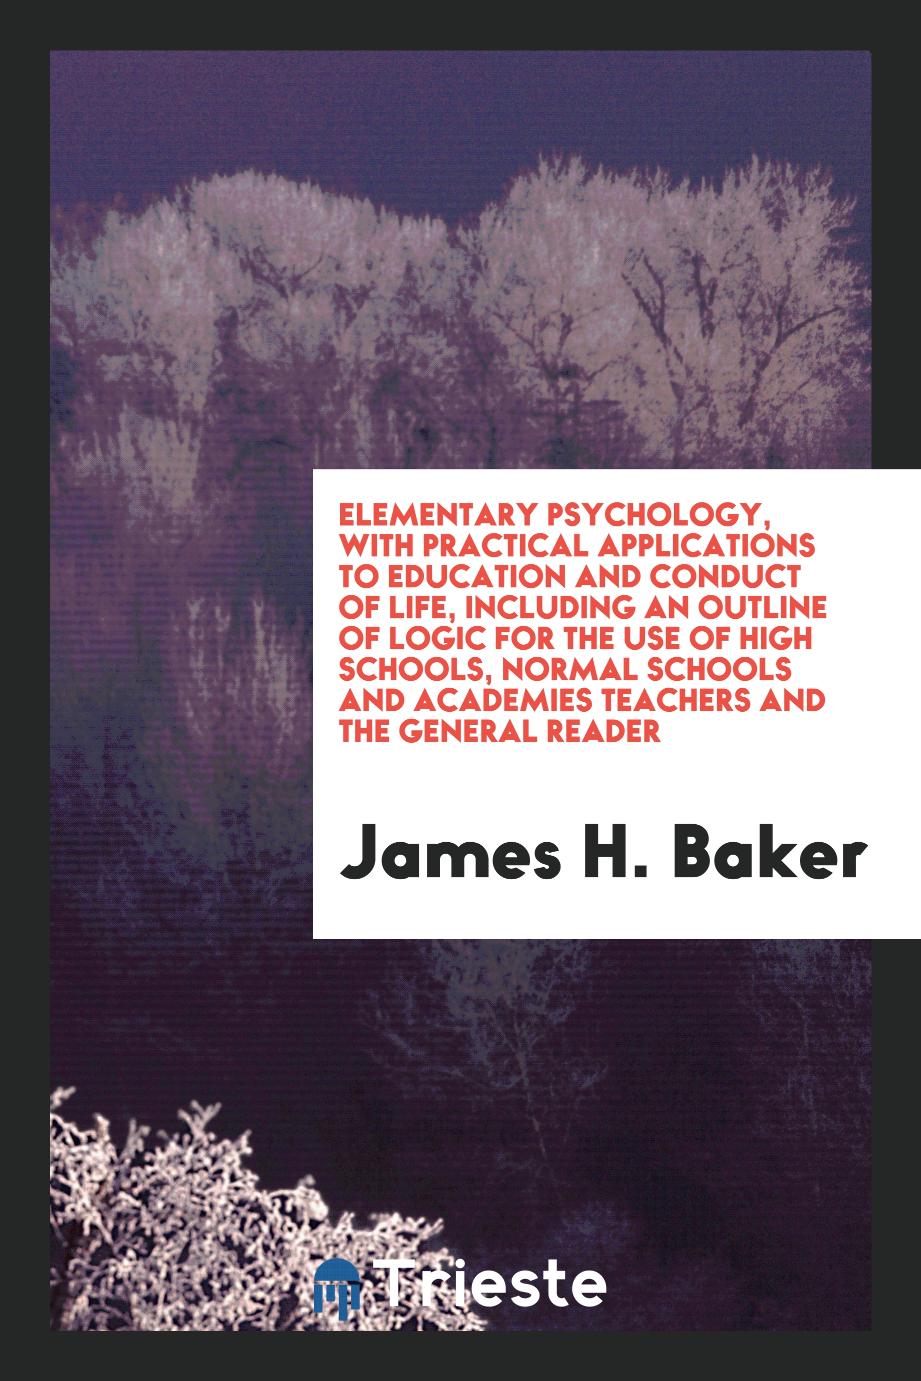 James H. Baker - Elementary Psychology, with Practical Applications to Education and Conduct of Life, Including an Outline of Logic for the Use of High Schools, Normal Schools and Academies Teachers and the General Reader